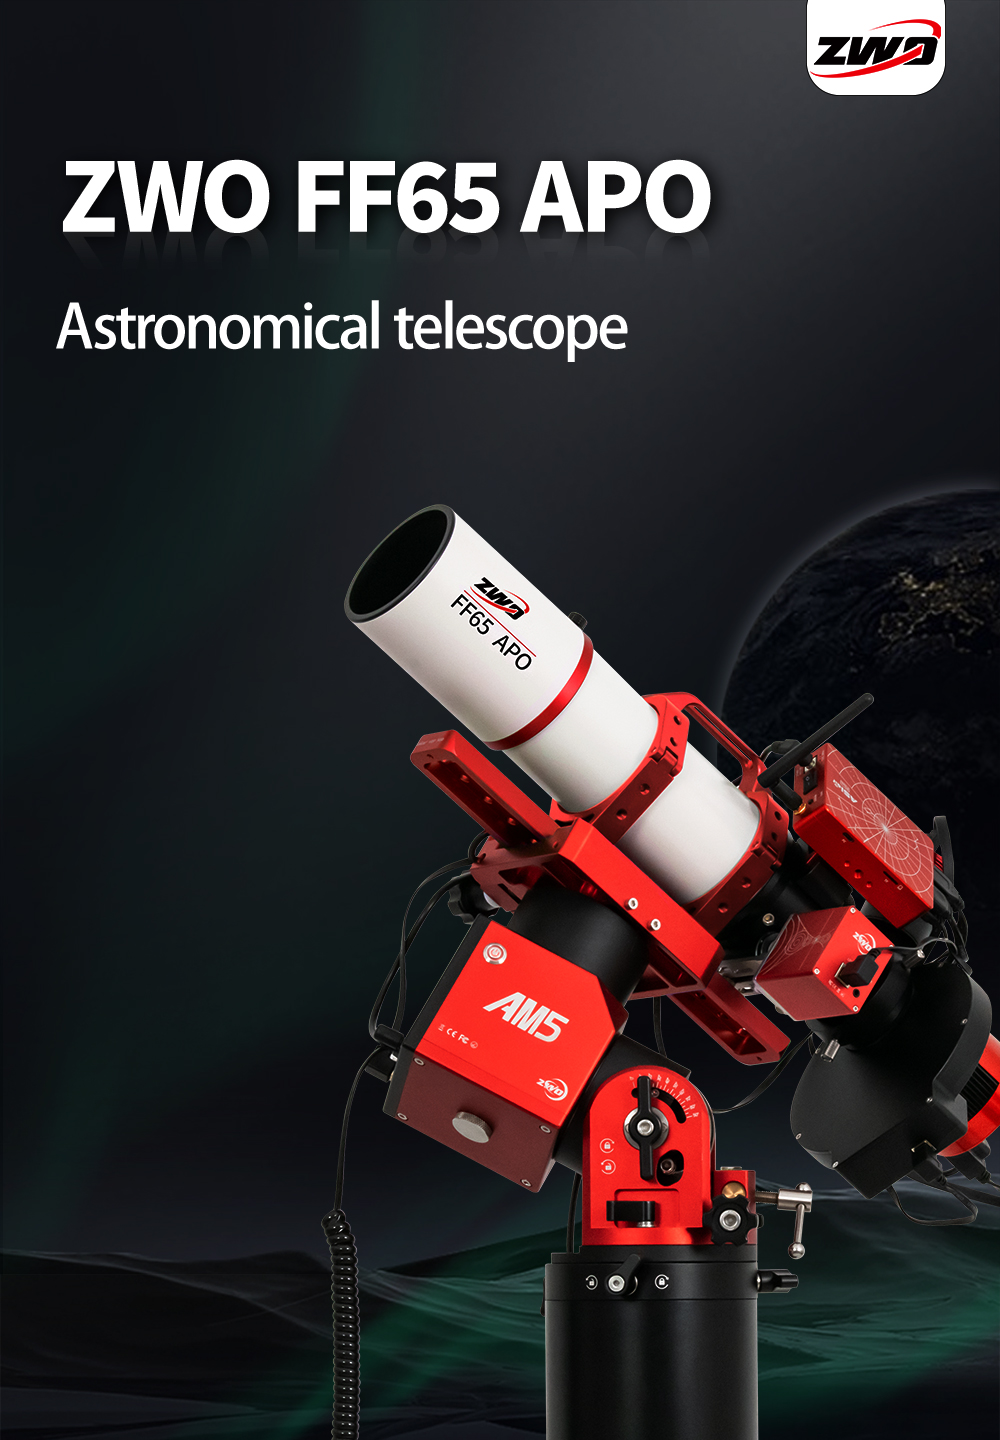  The very good correction and the self-flattening design make this small telescope a compact photo machine. [EN] 